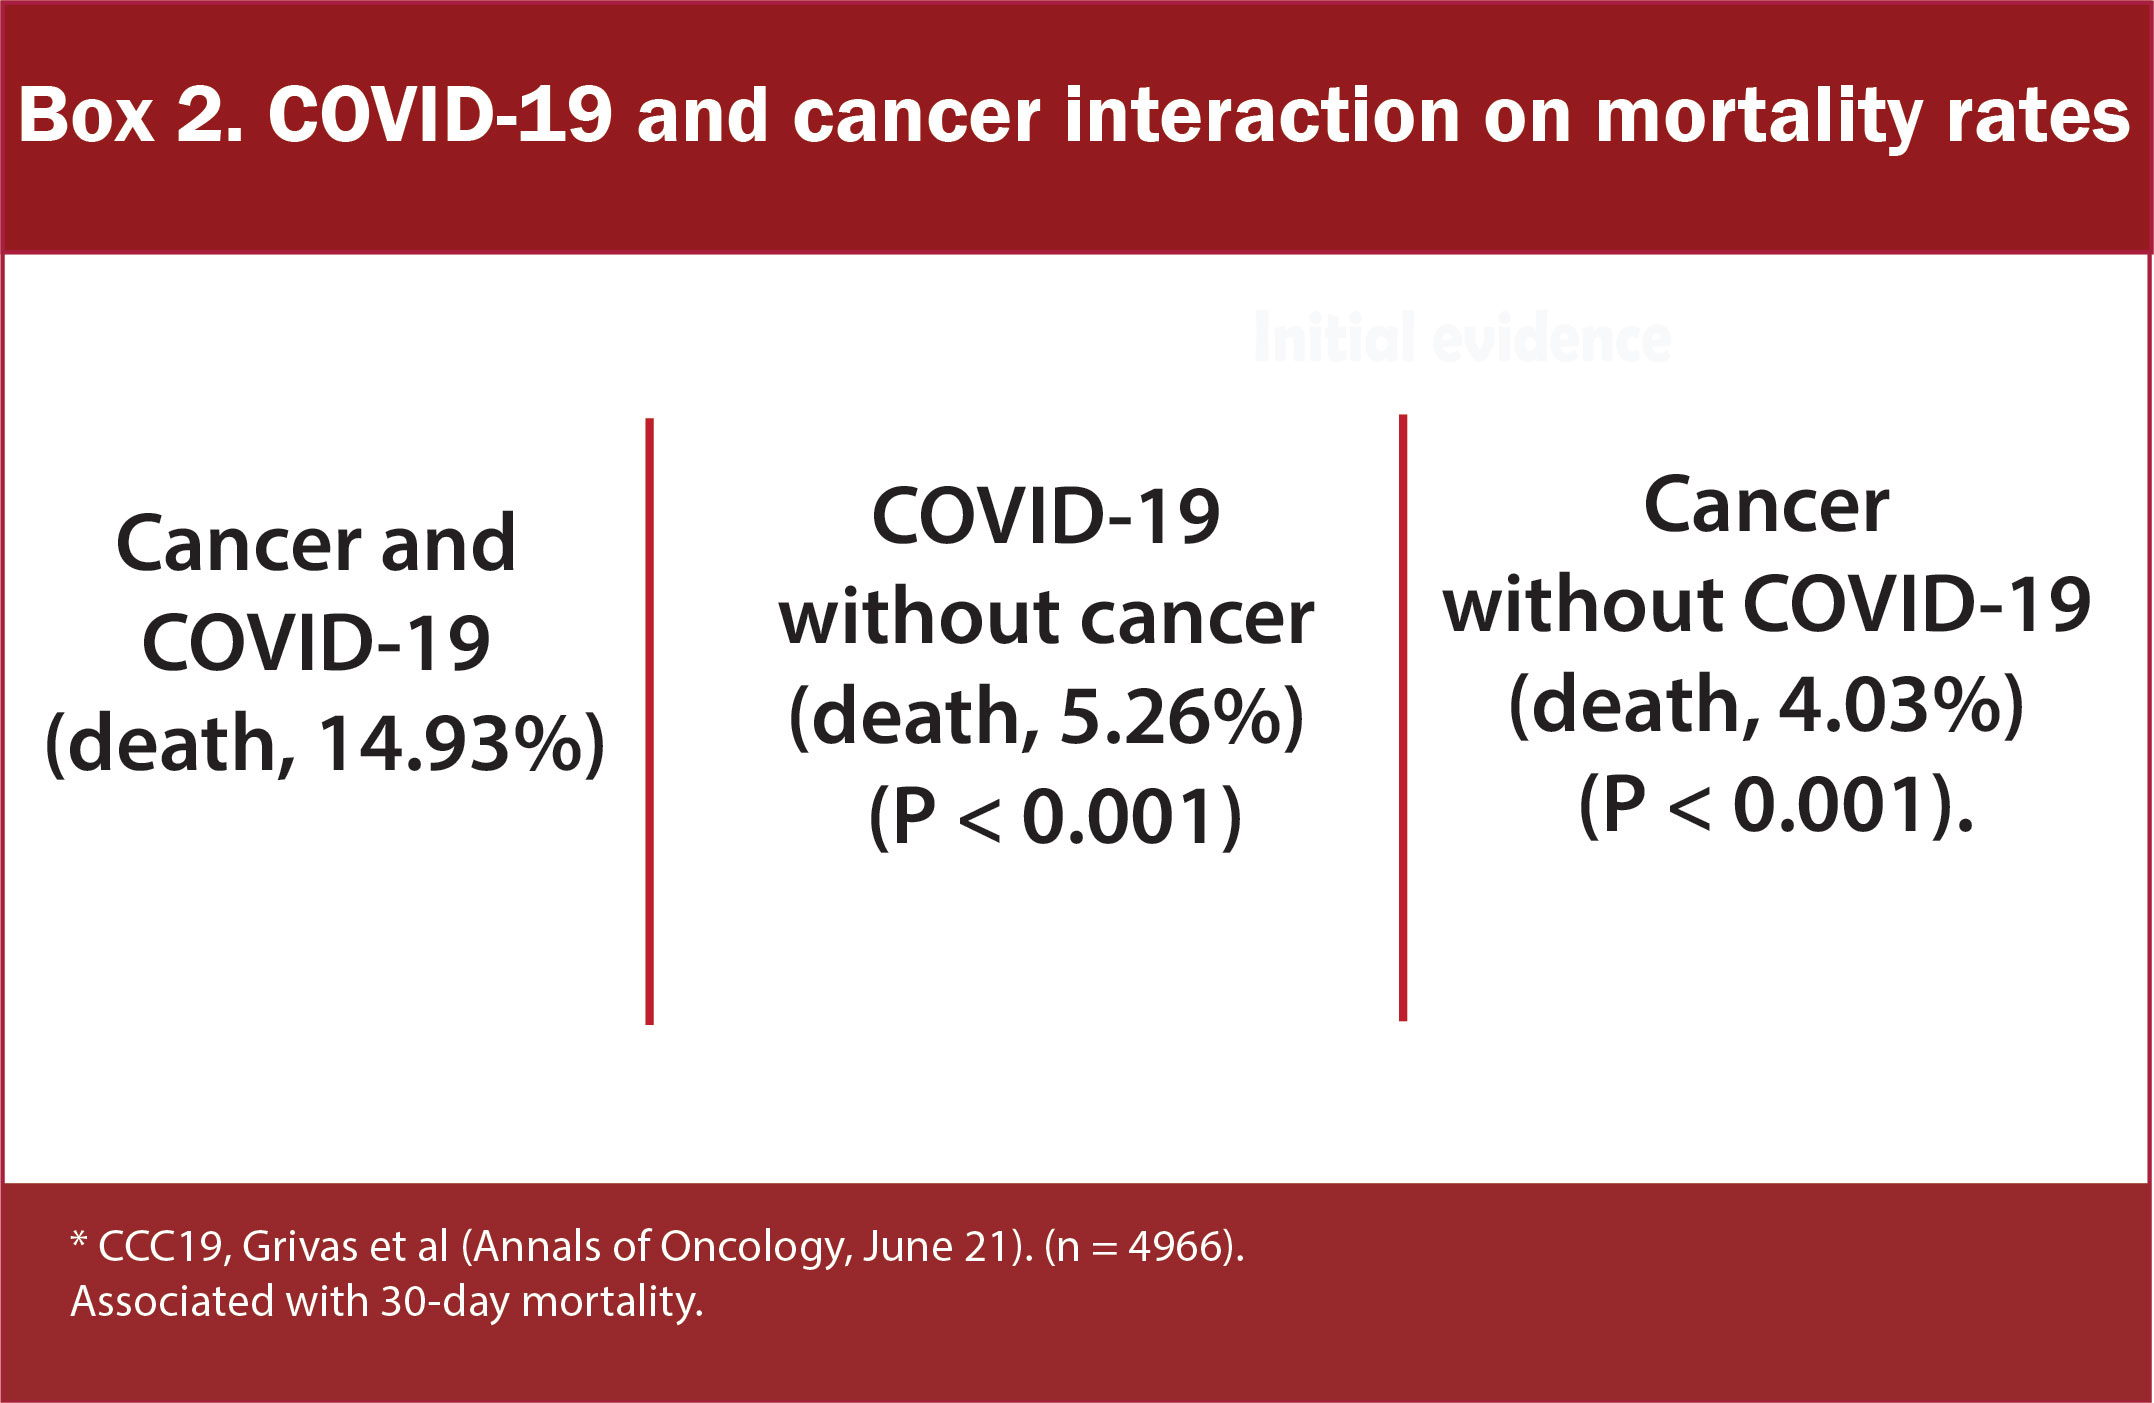 Frontiers  Cancer, more than a “COVID-19 co-morbidity”